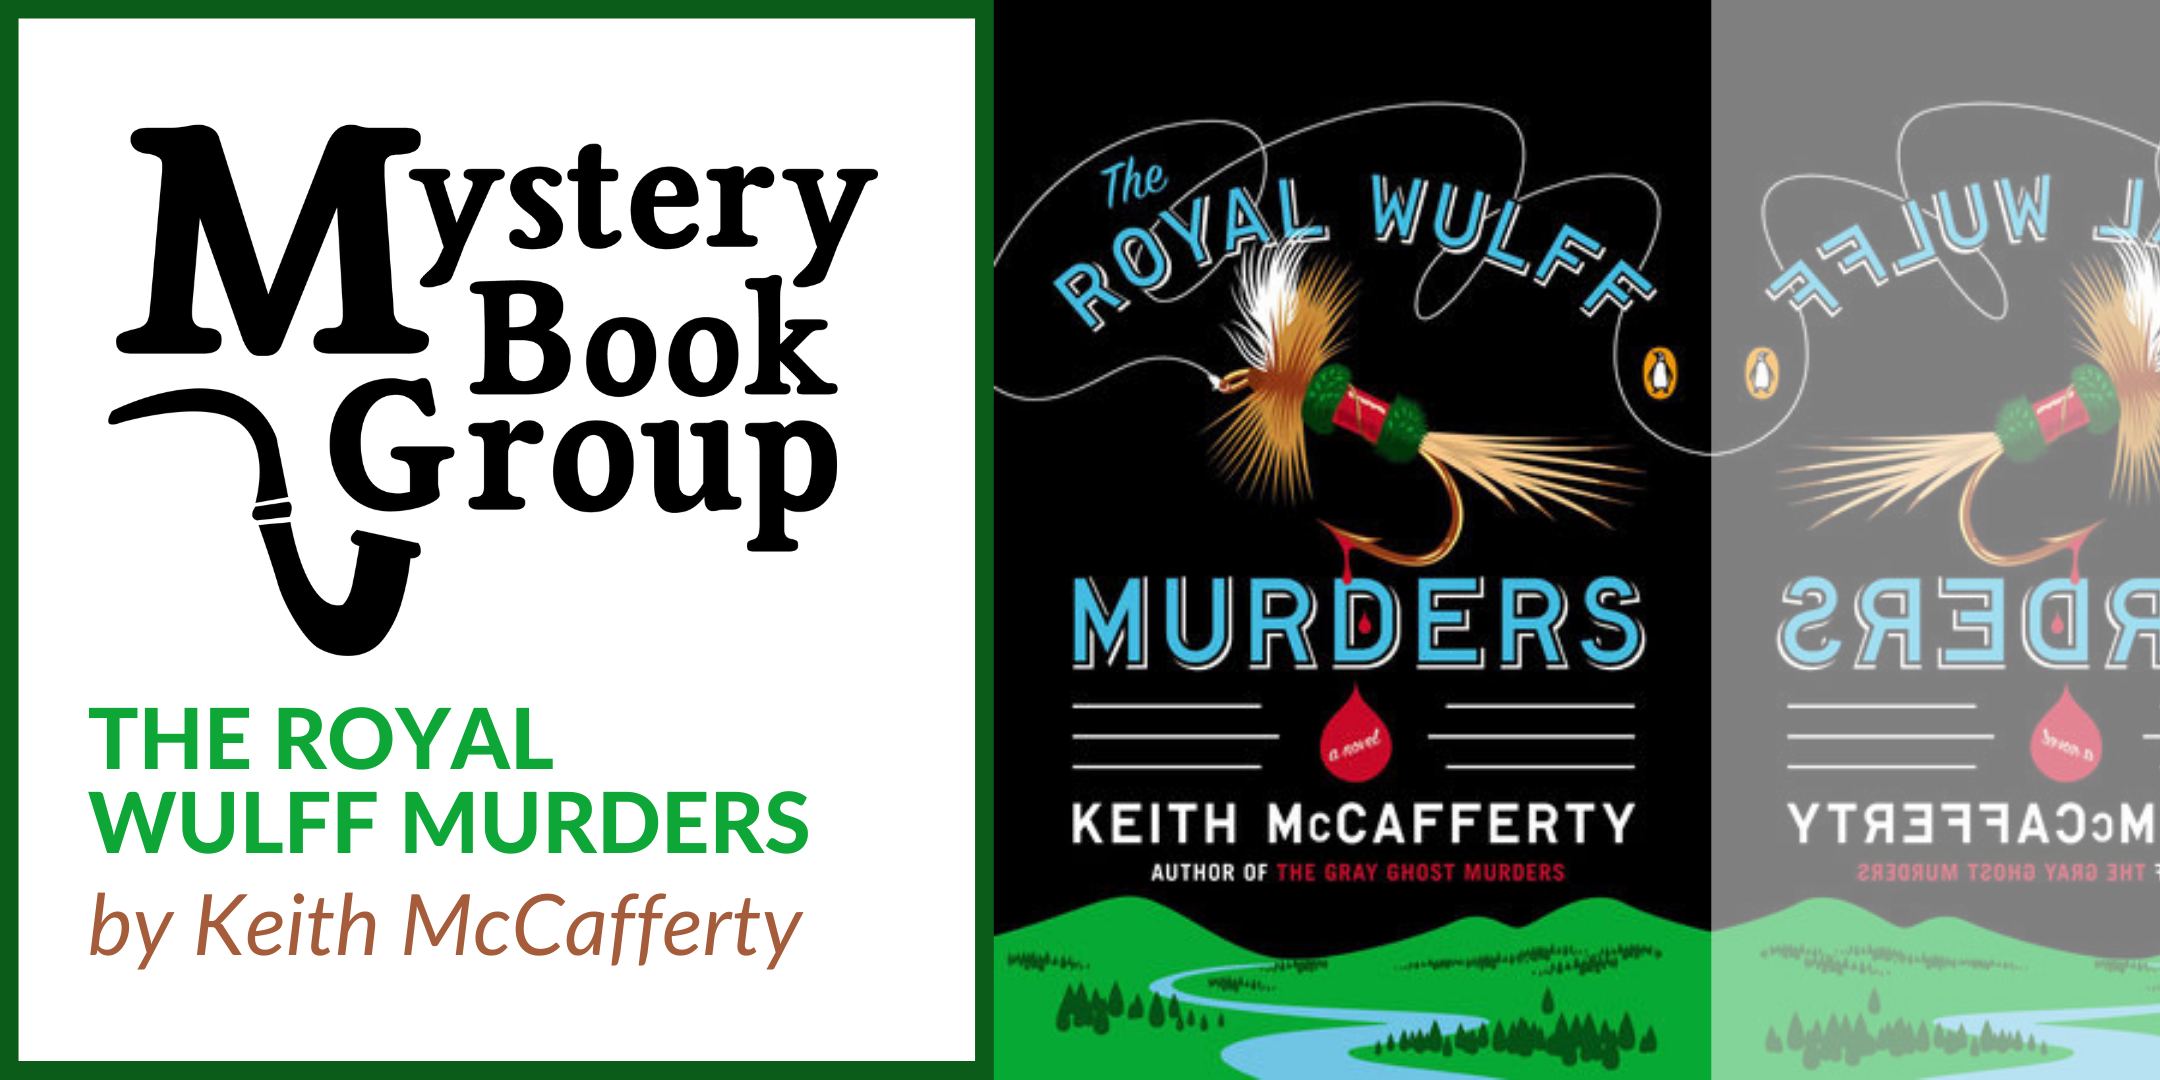 Mystery Book Group: The Royal Wulff Murders event image